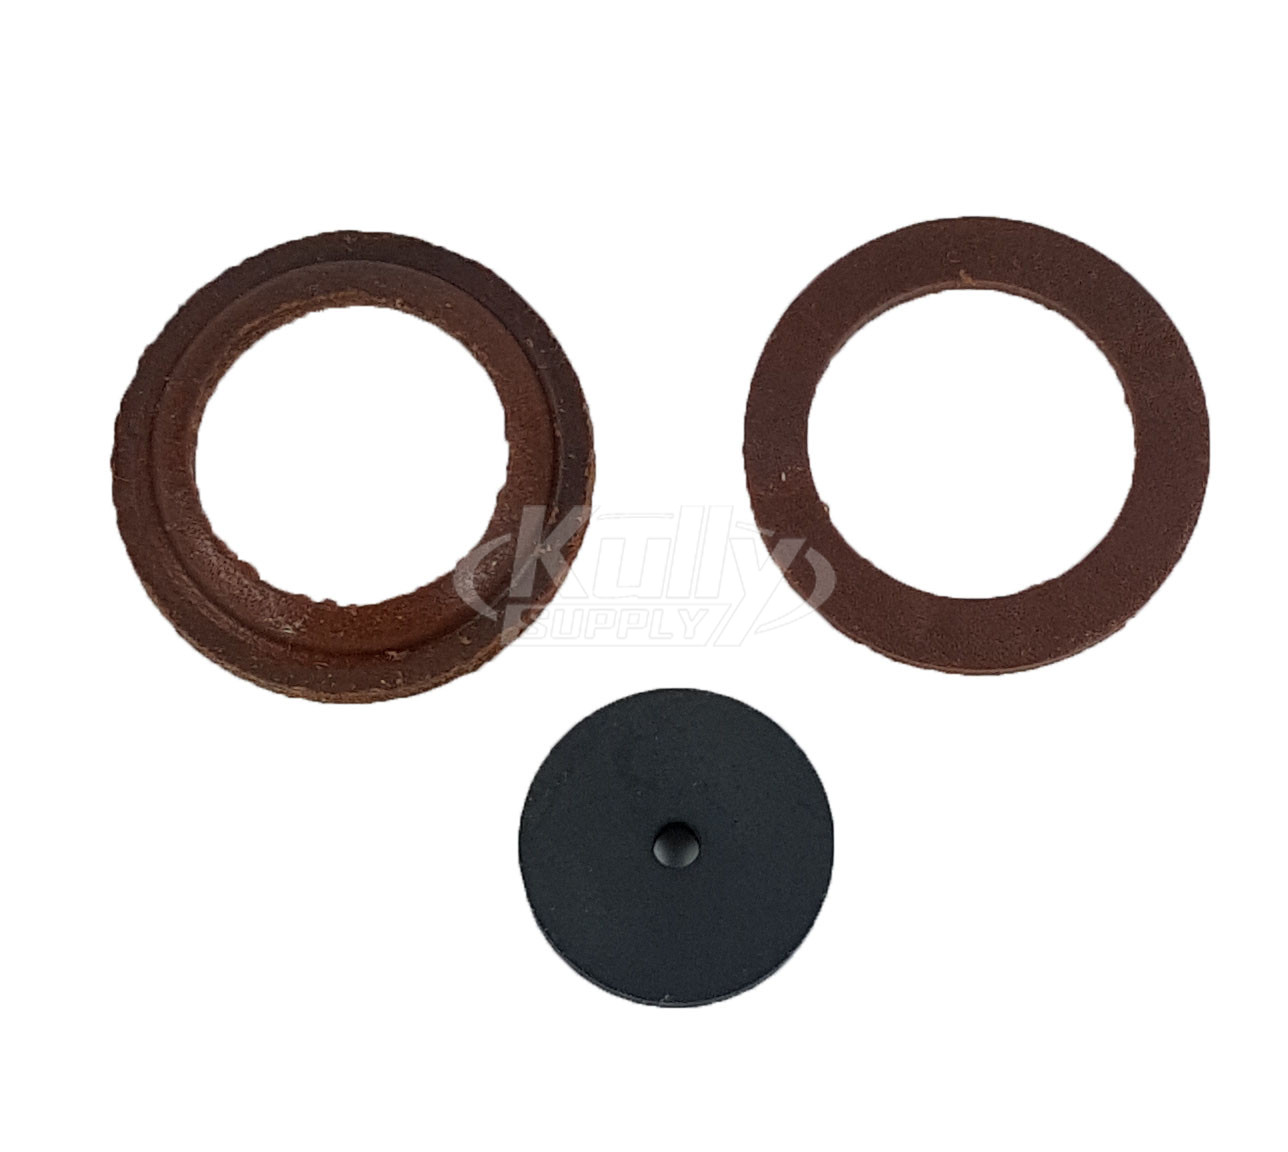 Murdock 4100-854-001 Seat, Cup, & Ring Washer Set